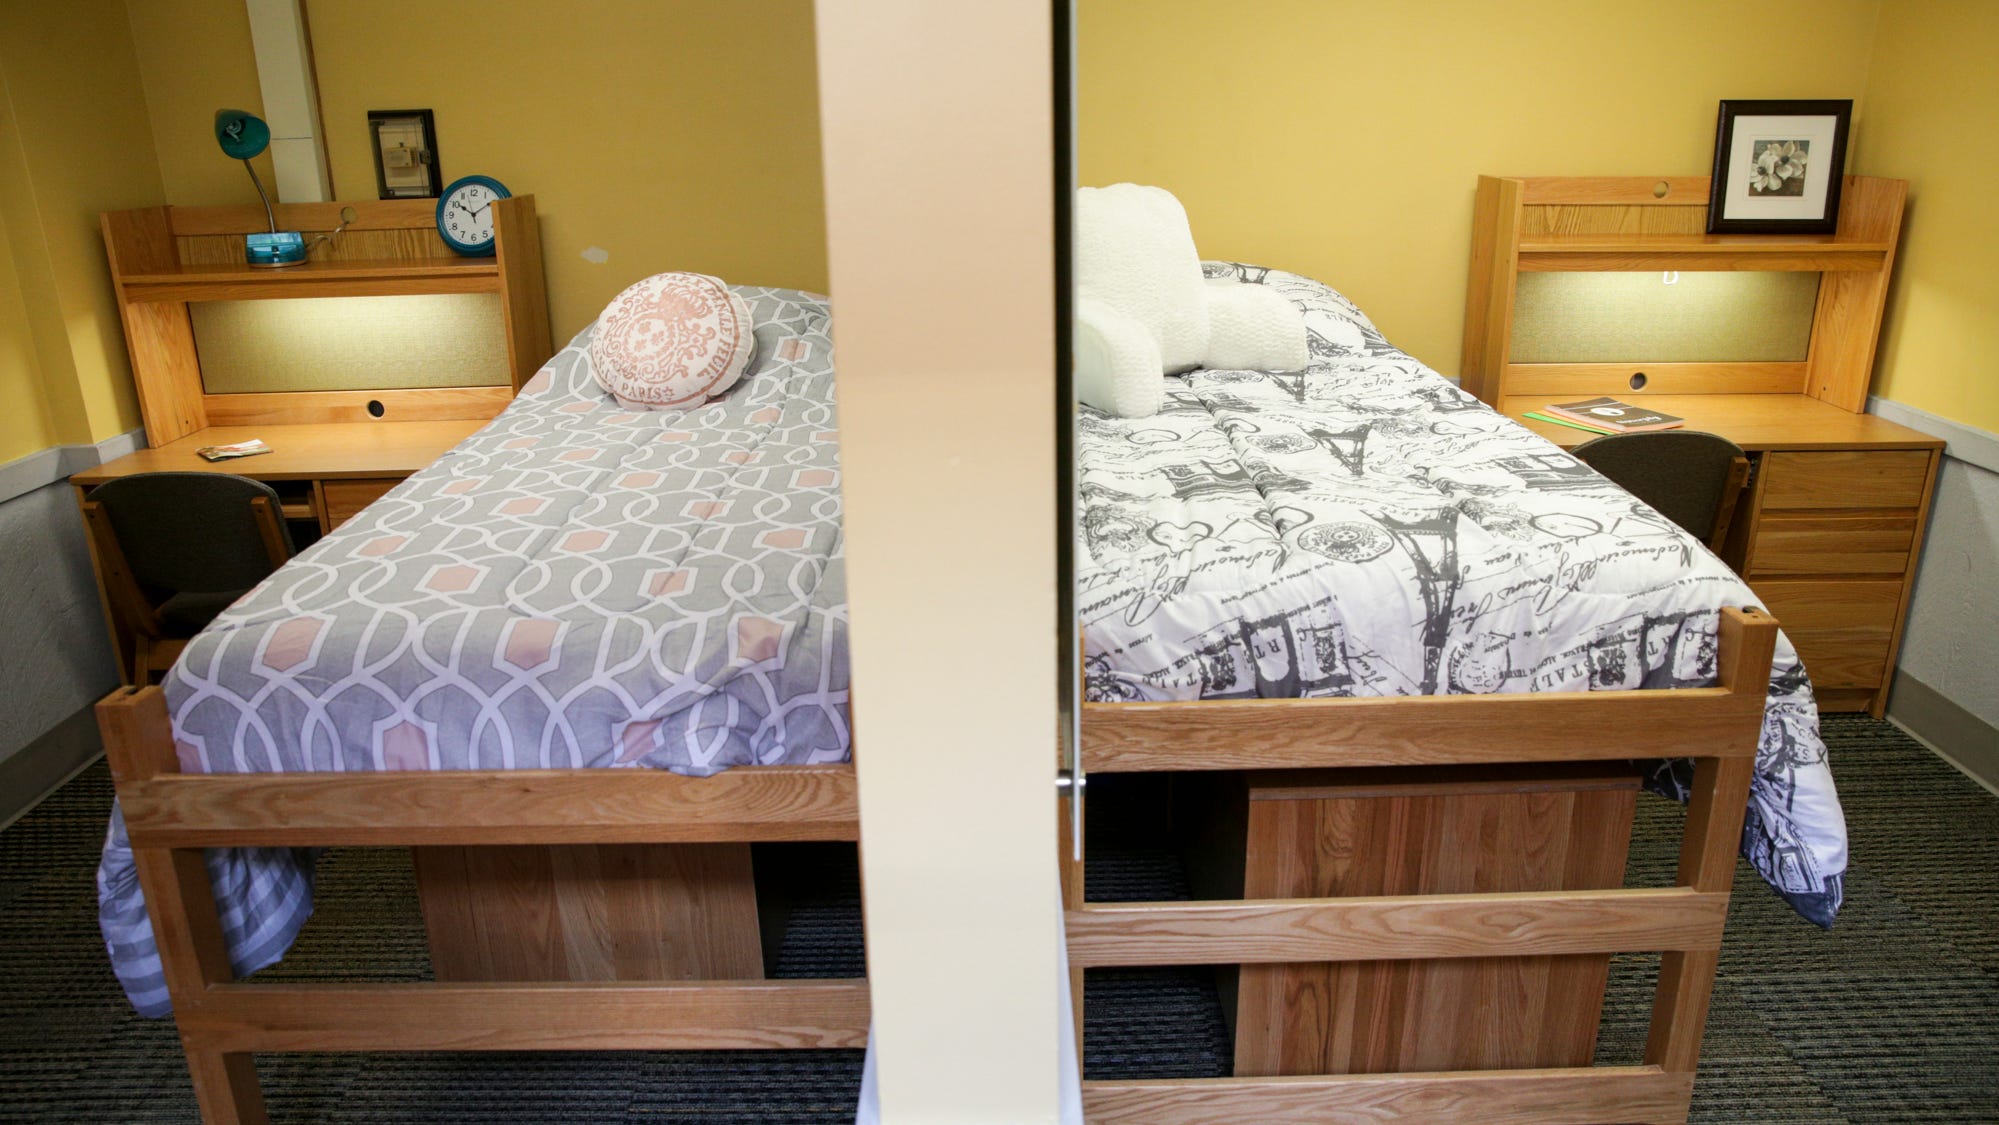 purdue-university-welcomes-freshman-class-by-re-condensing-dorms